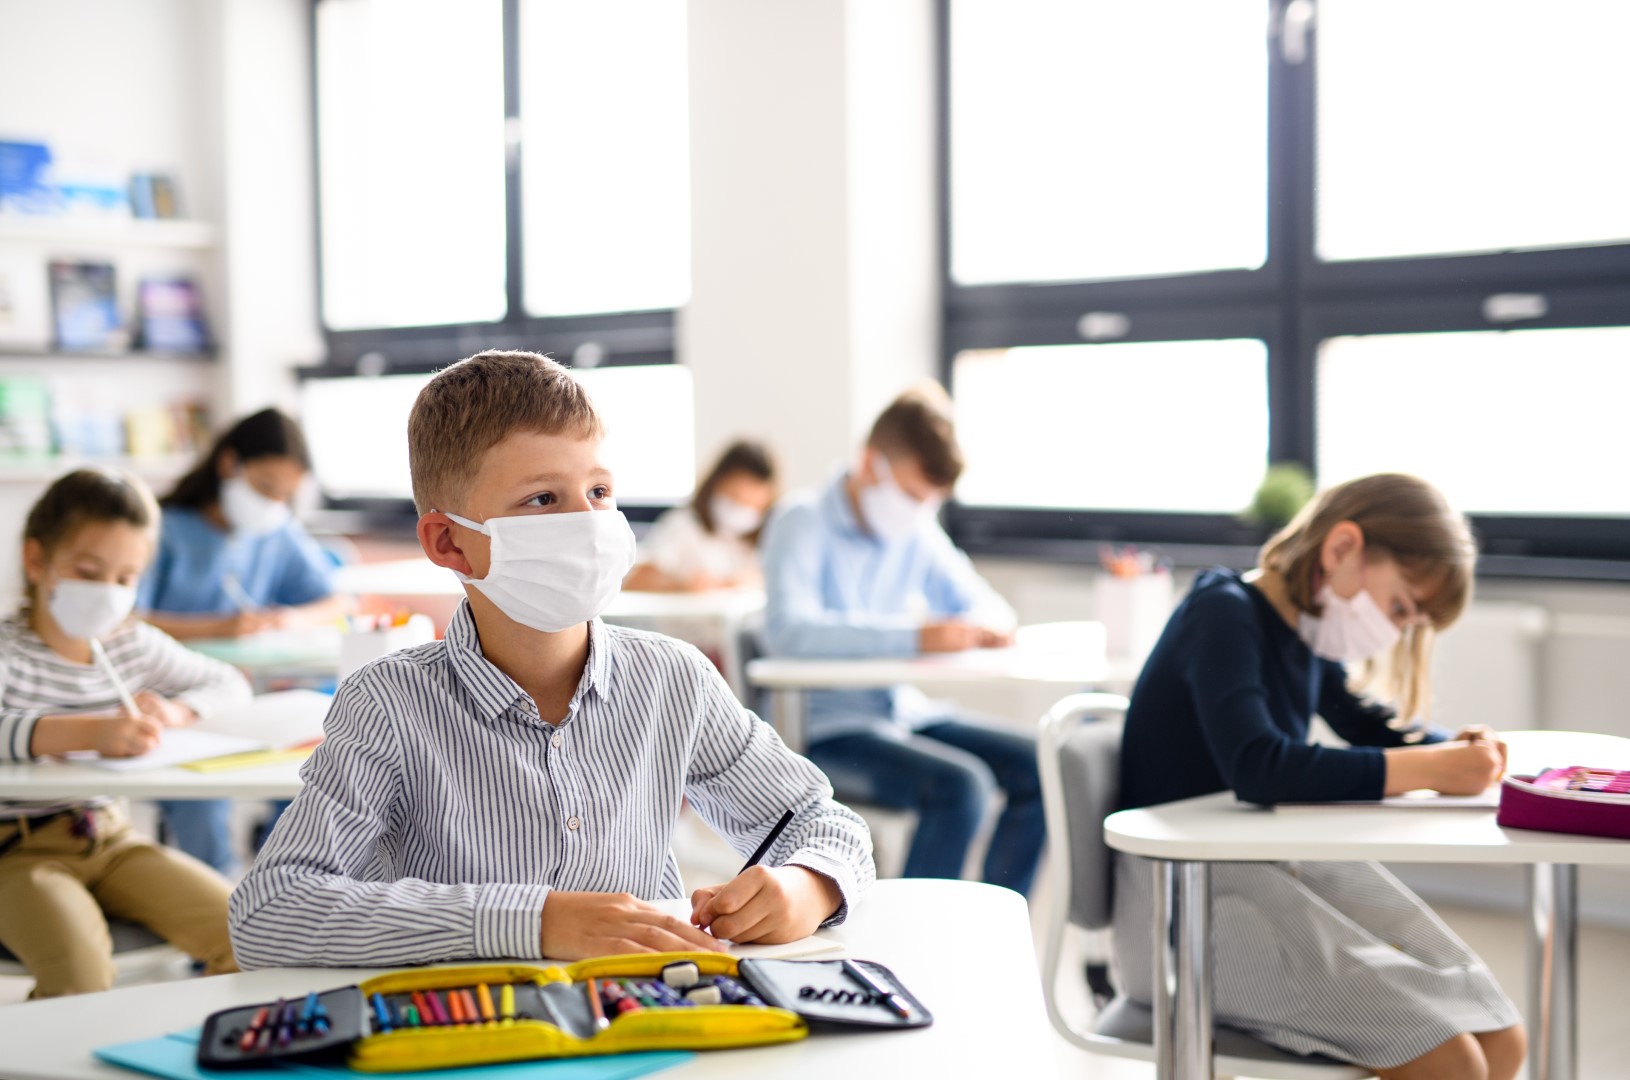 Mask mandate may relax in MiamiDade schools